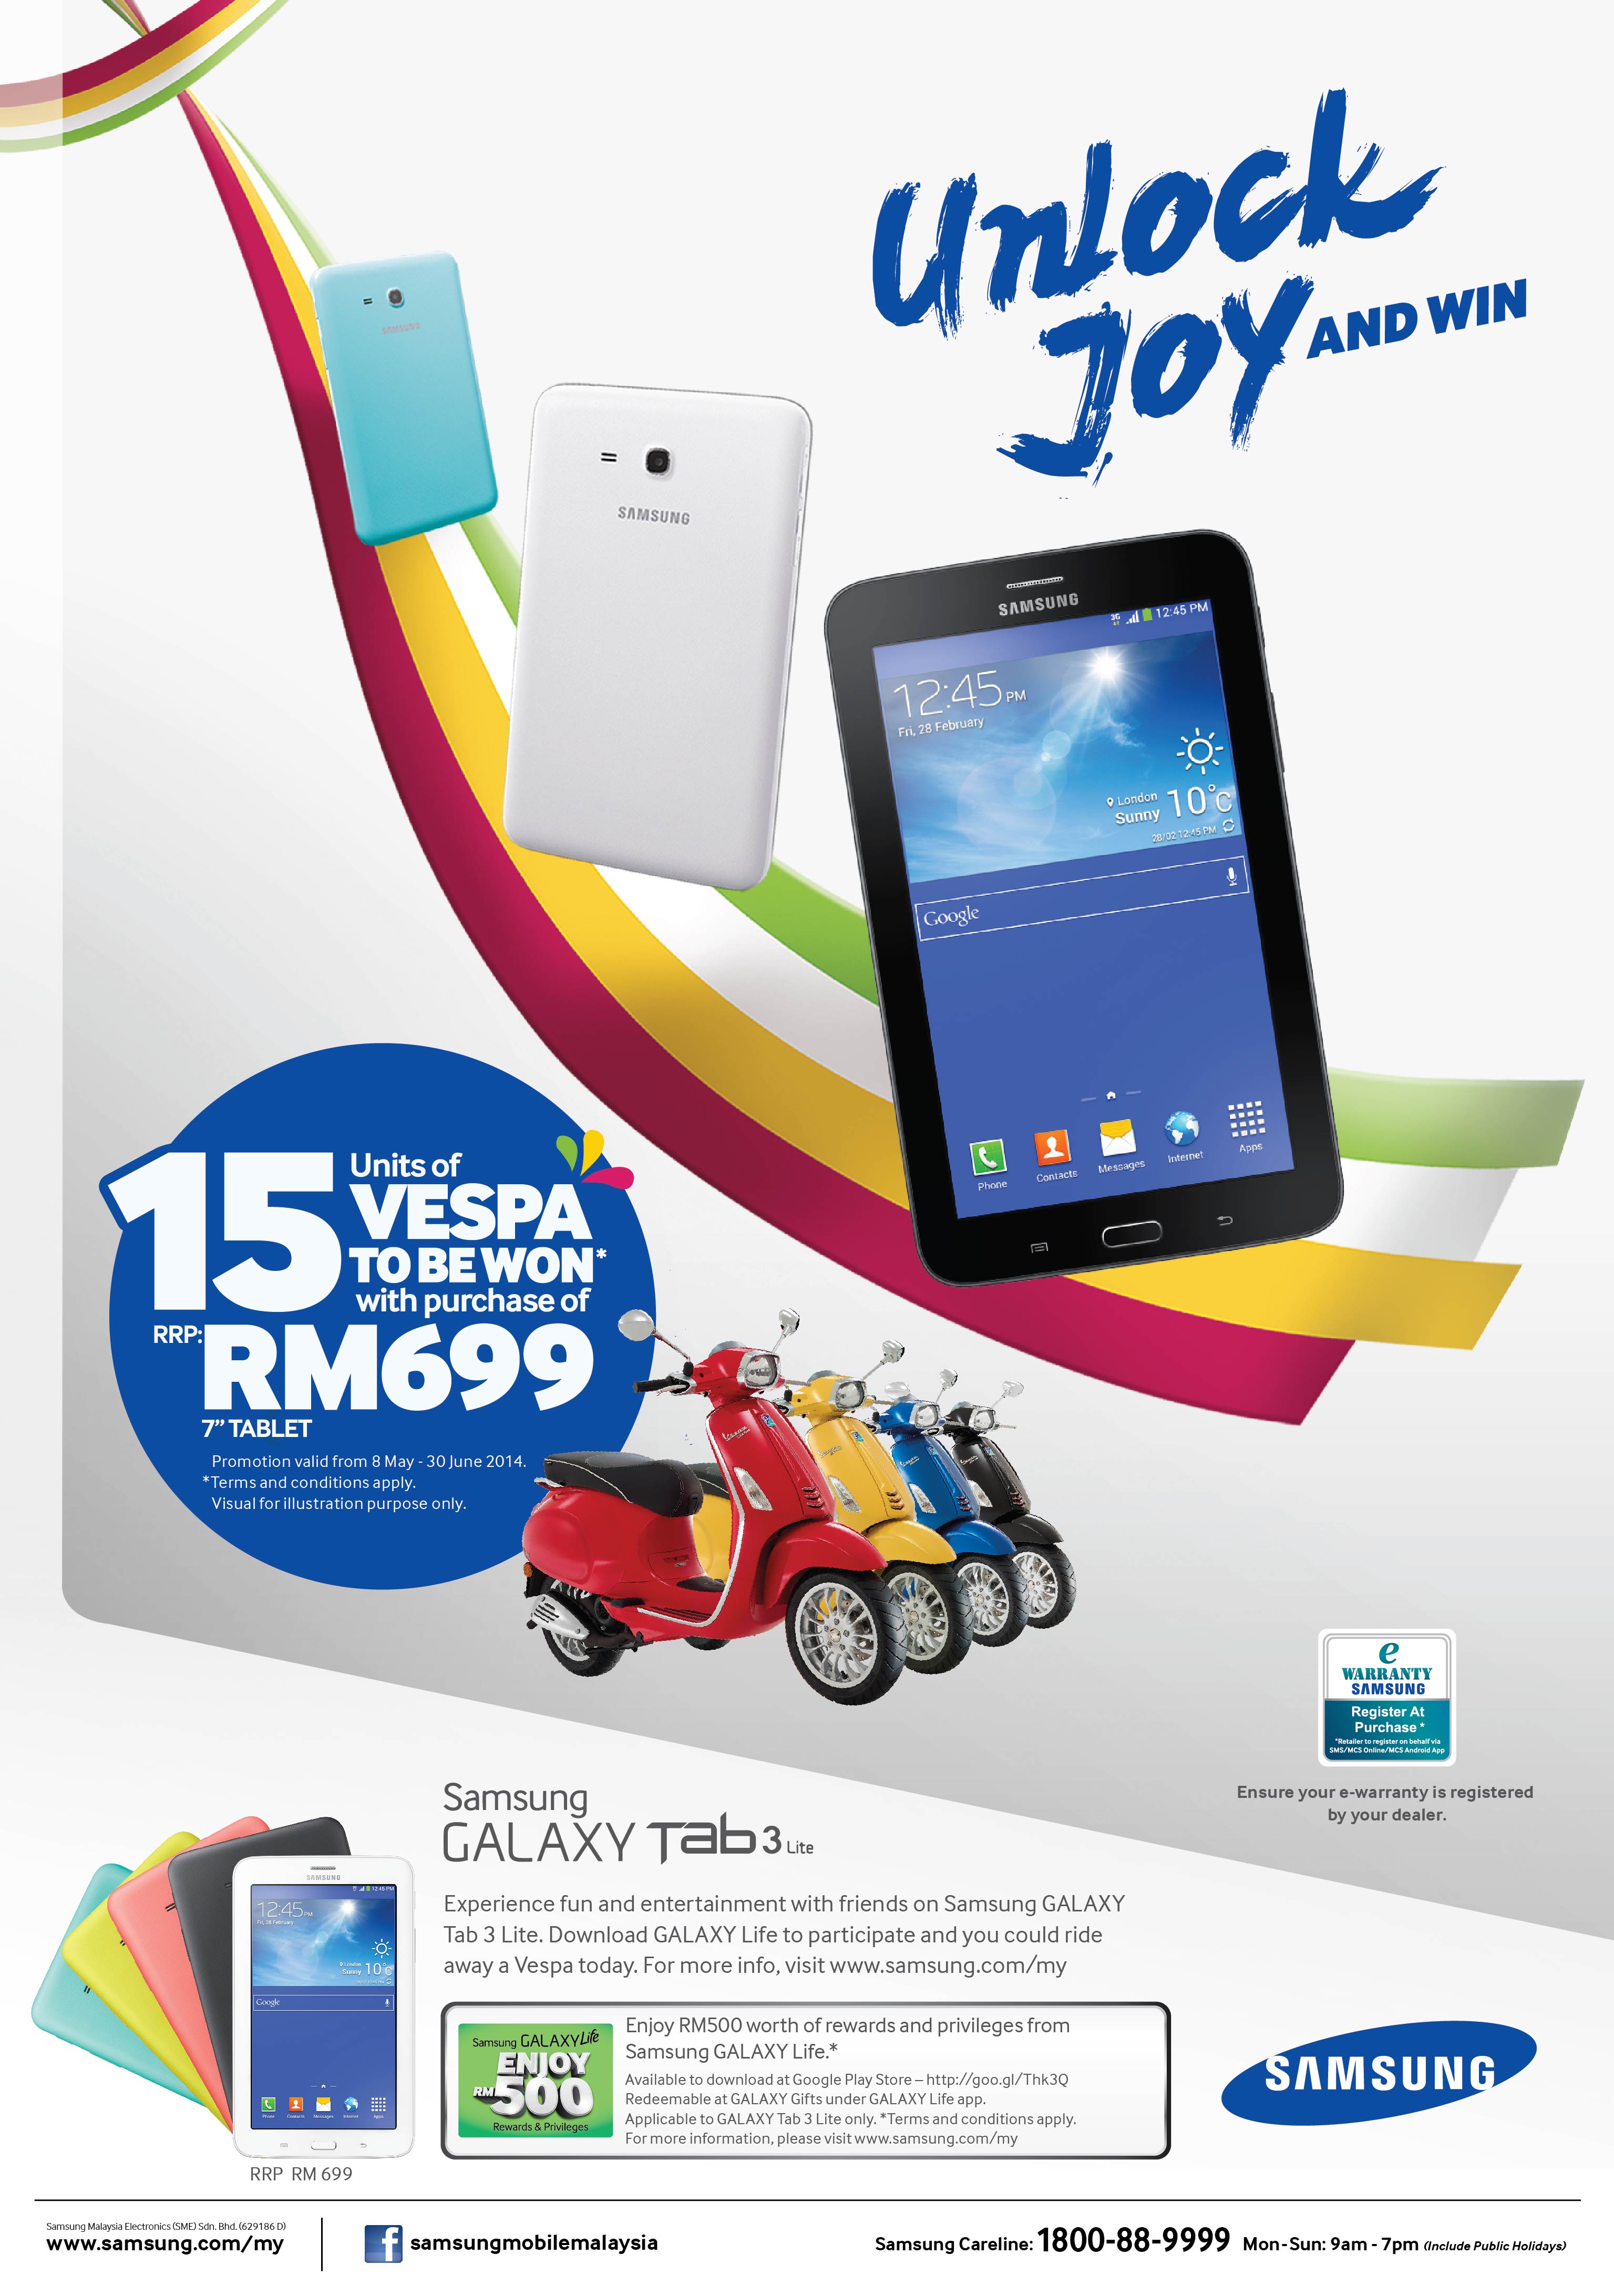 Buy A Samsung Galaxy Tab 3 Lite And Stand A Chance To Win 1 of 15 Vespas - Lowyat.NET3071 x 4370